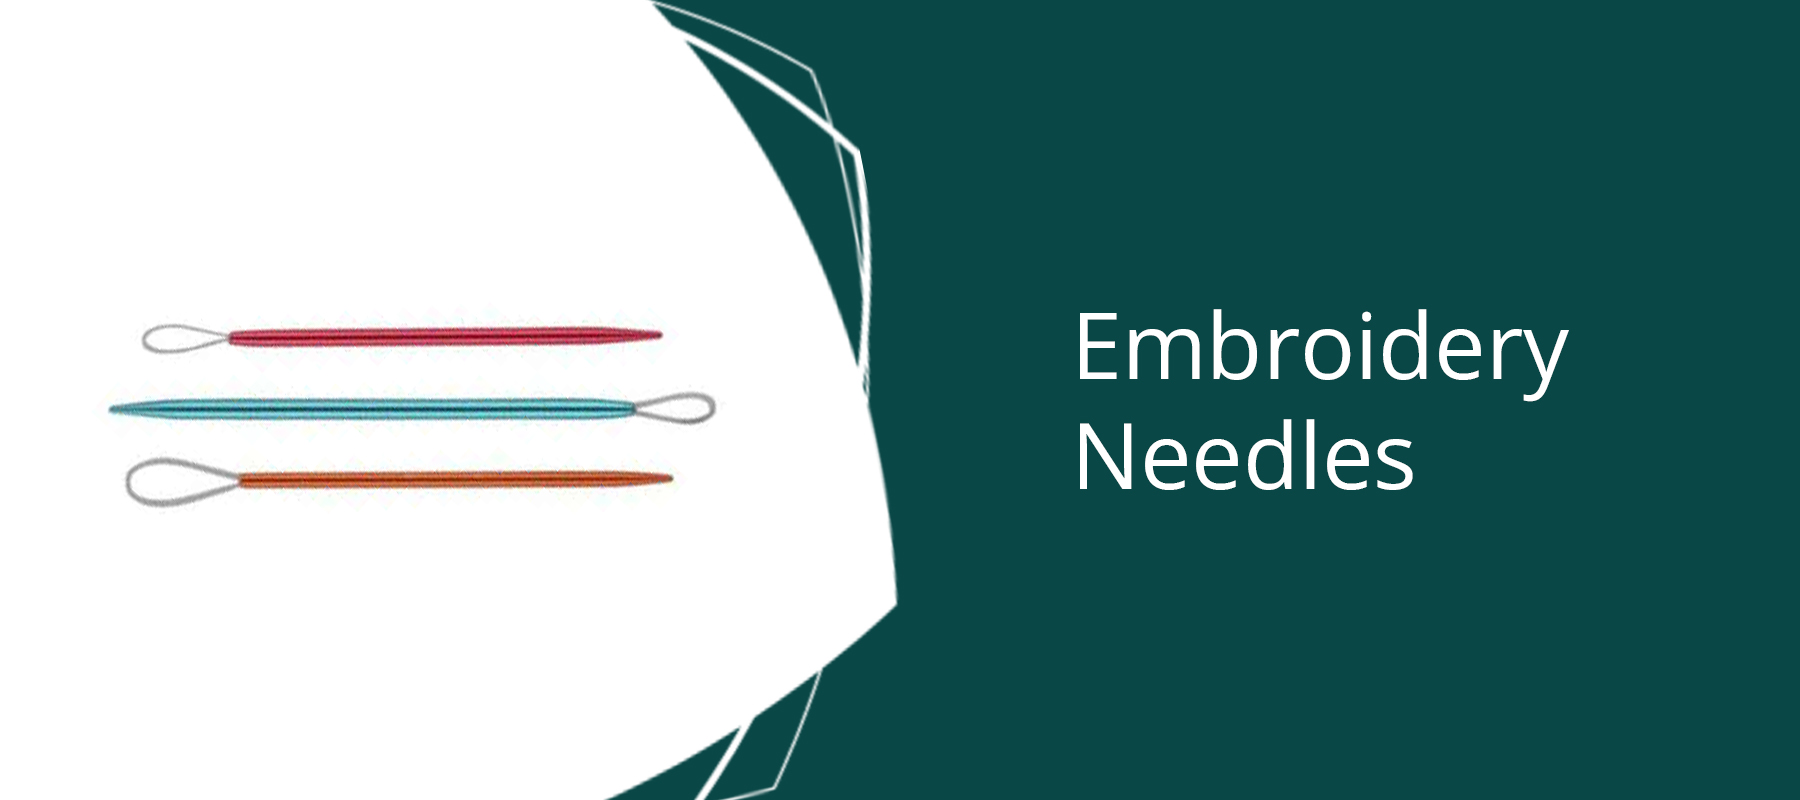 Embroidery Needles for Cross Stitch and Needlework